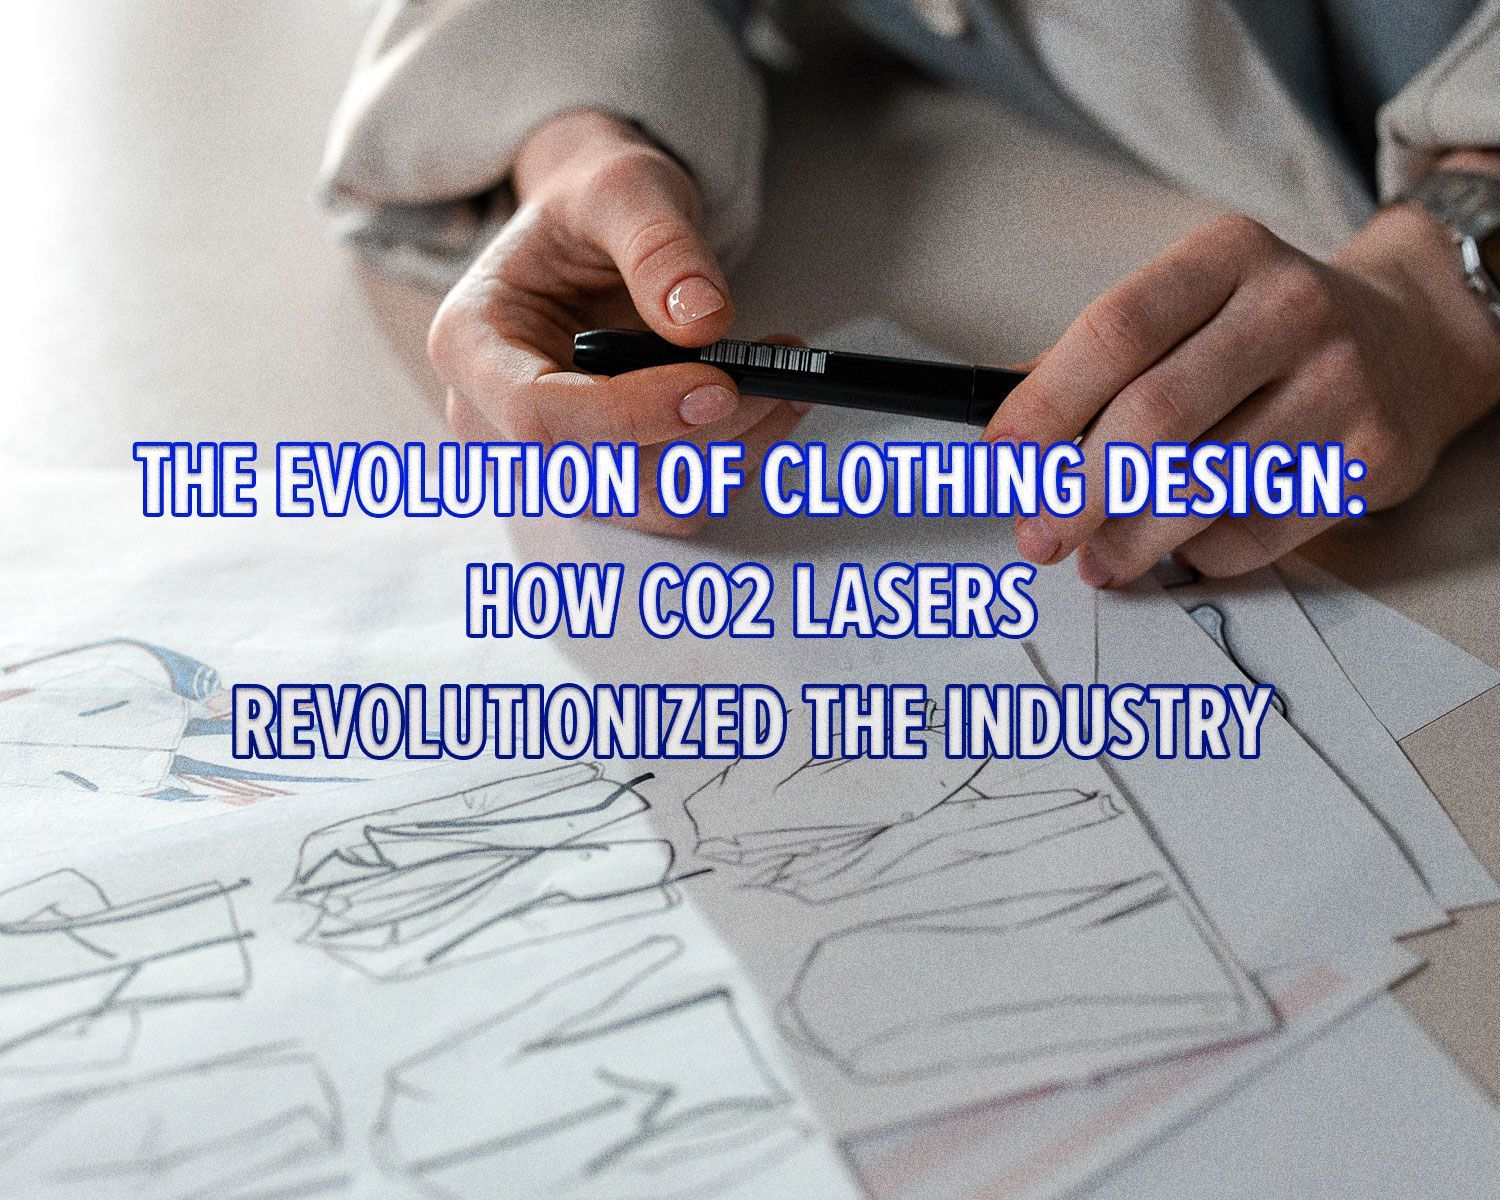 The Evolution of Clothing Design: How CO2 Lasers Revolutionized the ...